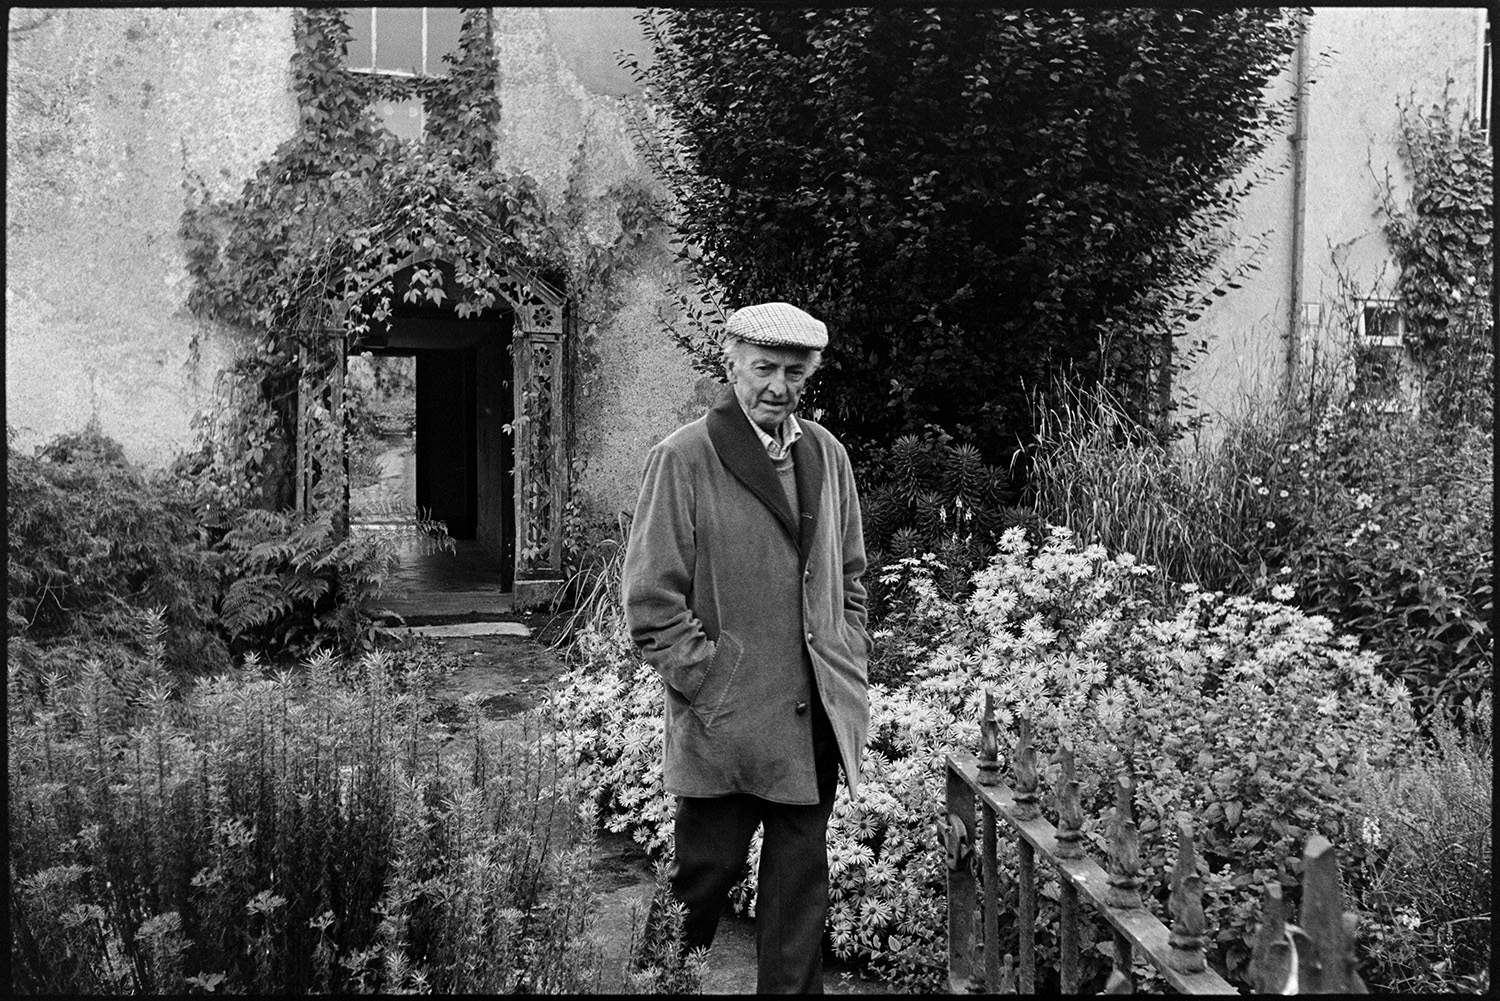 Doctor on rounds talking to man patient in kitchen with panelling  and table drawers. 
[John Huxtable walking through a garden with flowers at Narracott, South Molton. A plant is growing around the carved entrance to the building in the background.]